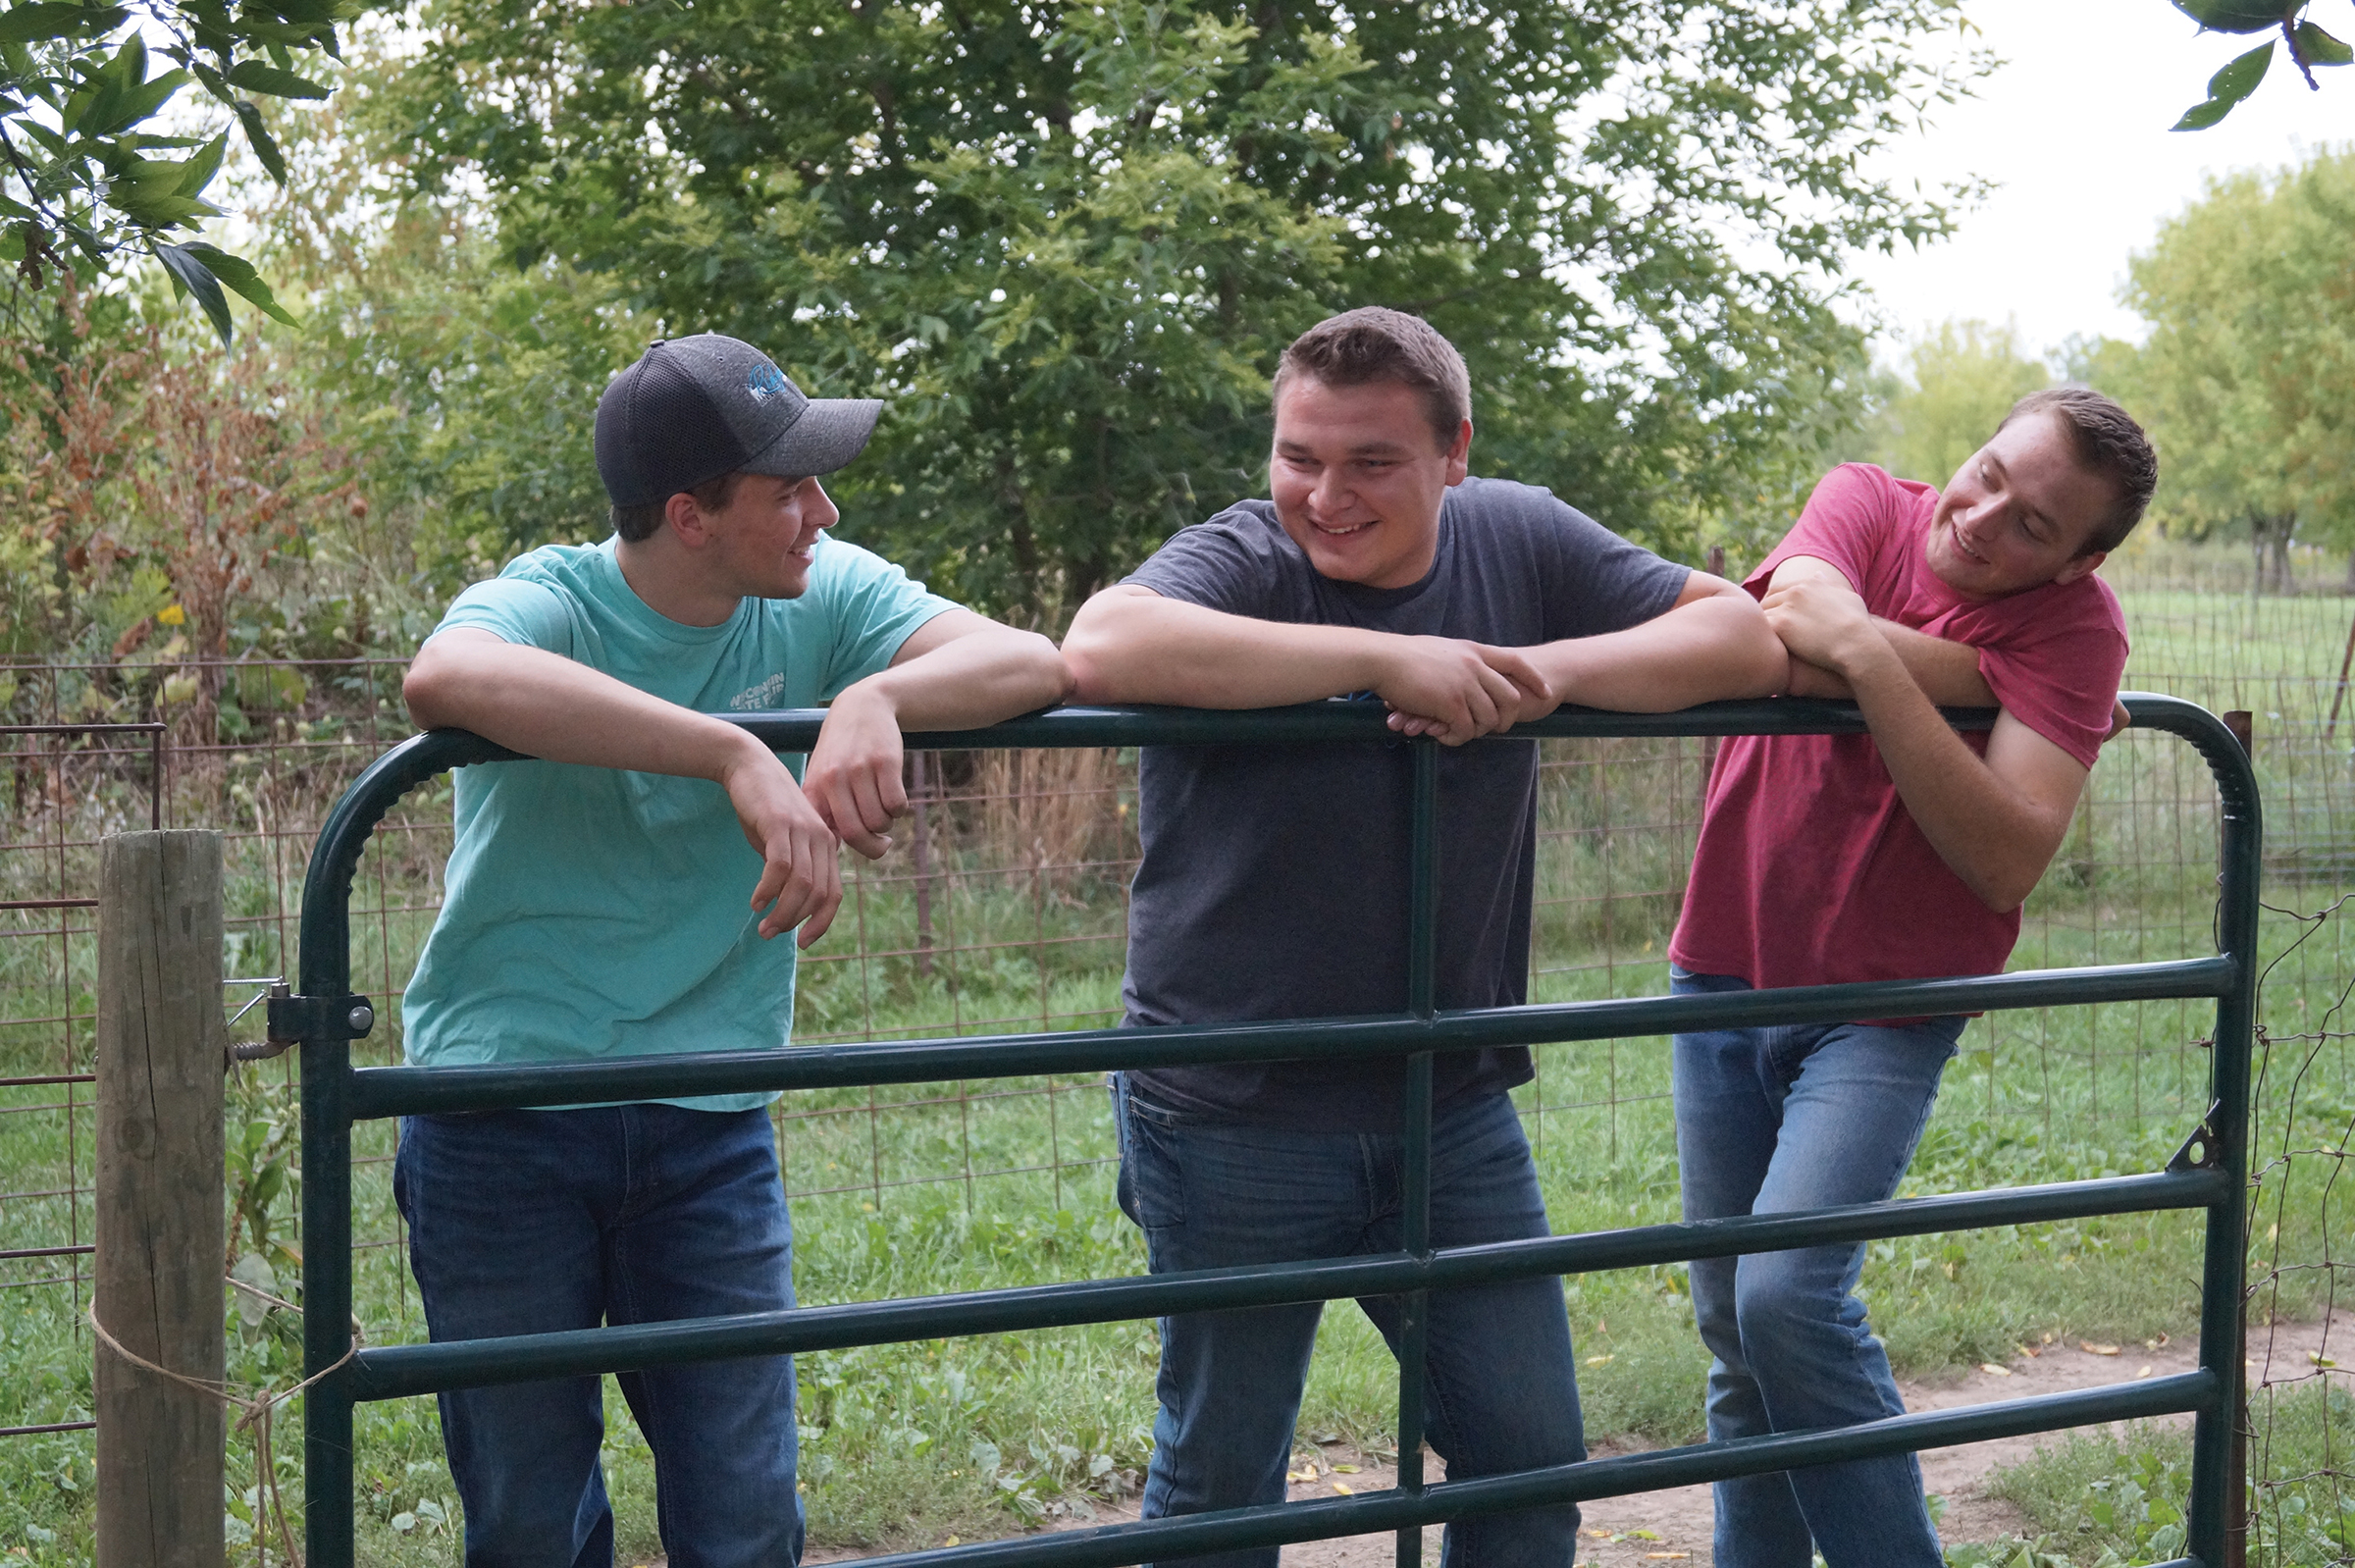 Brothers Paul, Josh and Tim Riemer talked about the lessons learned by raising and showing sheep.